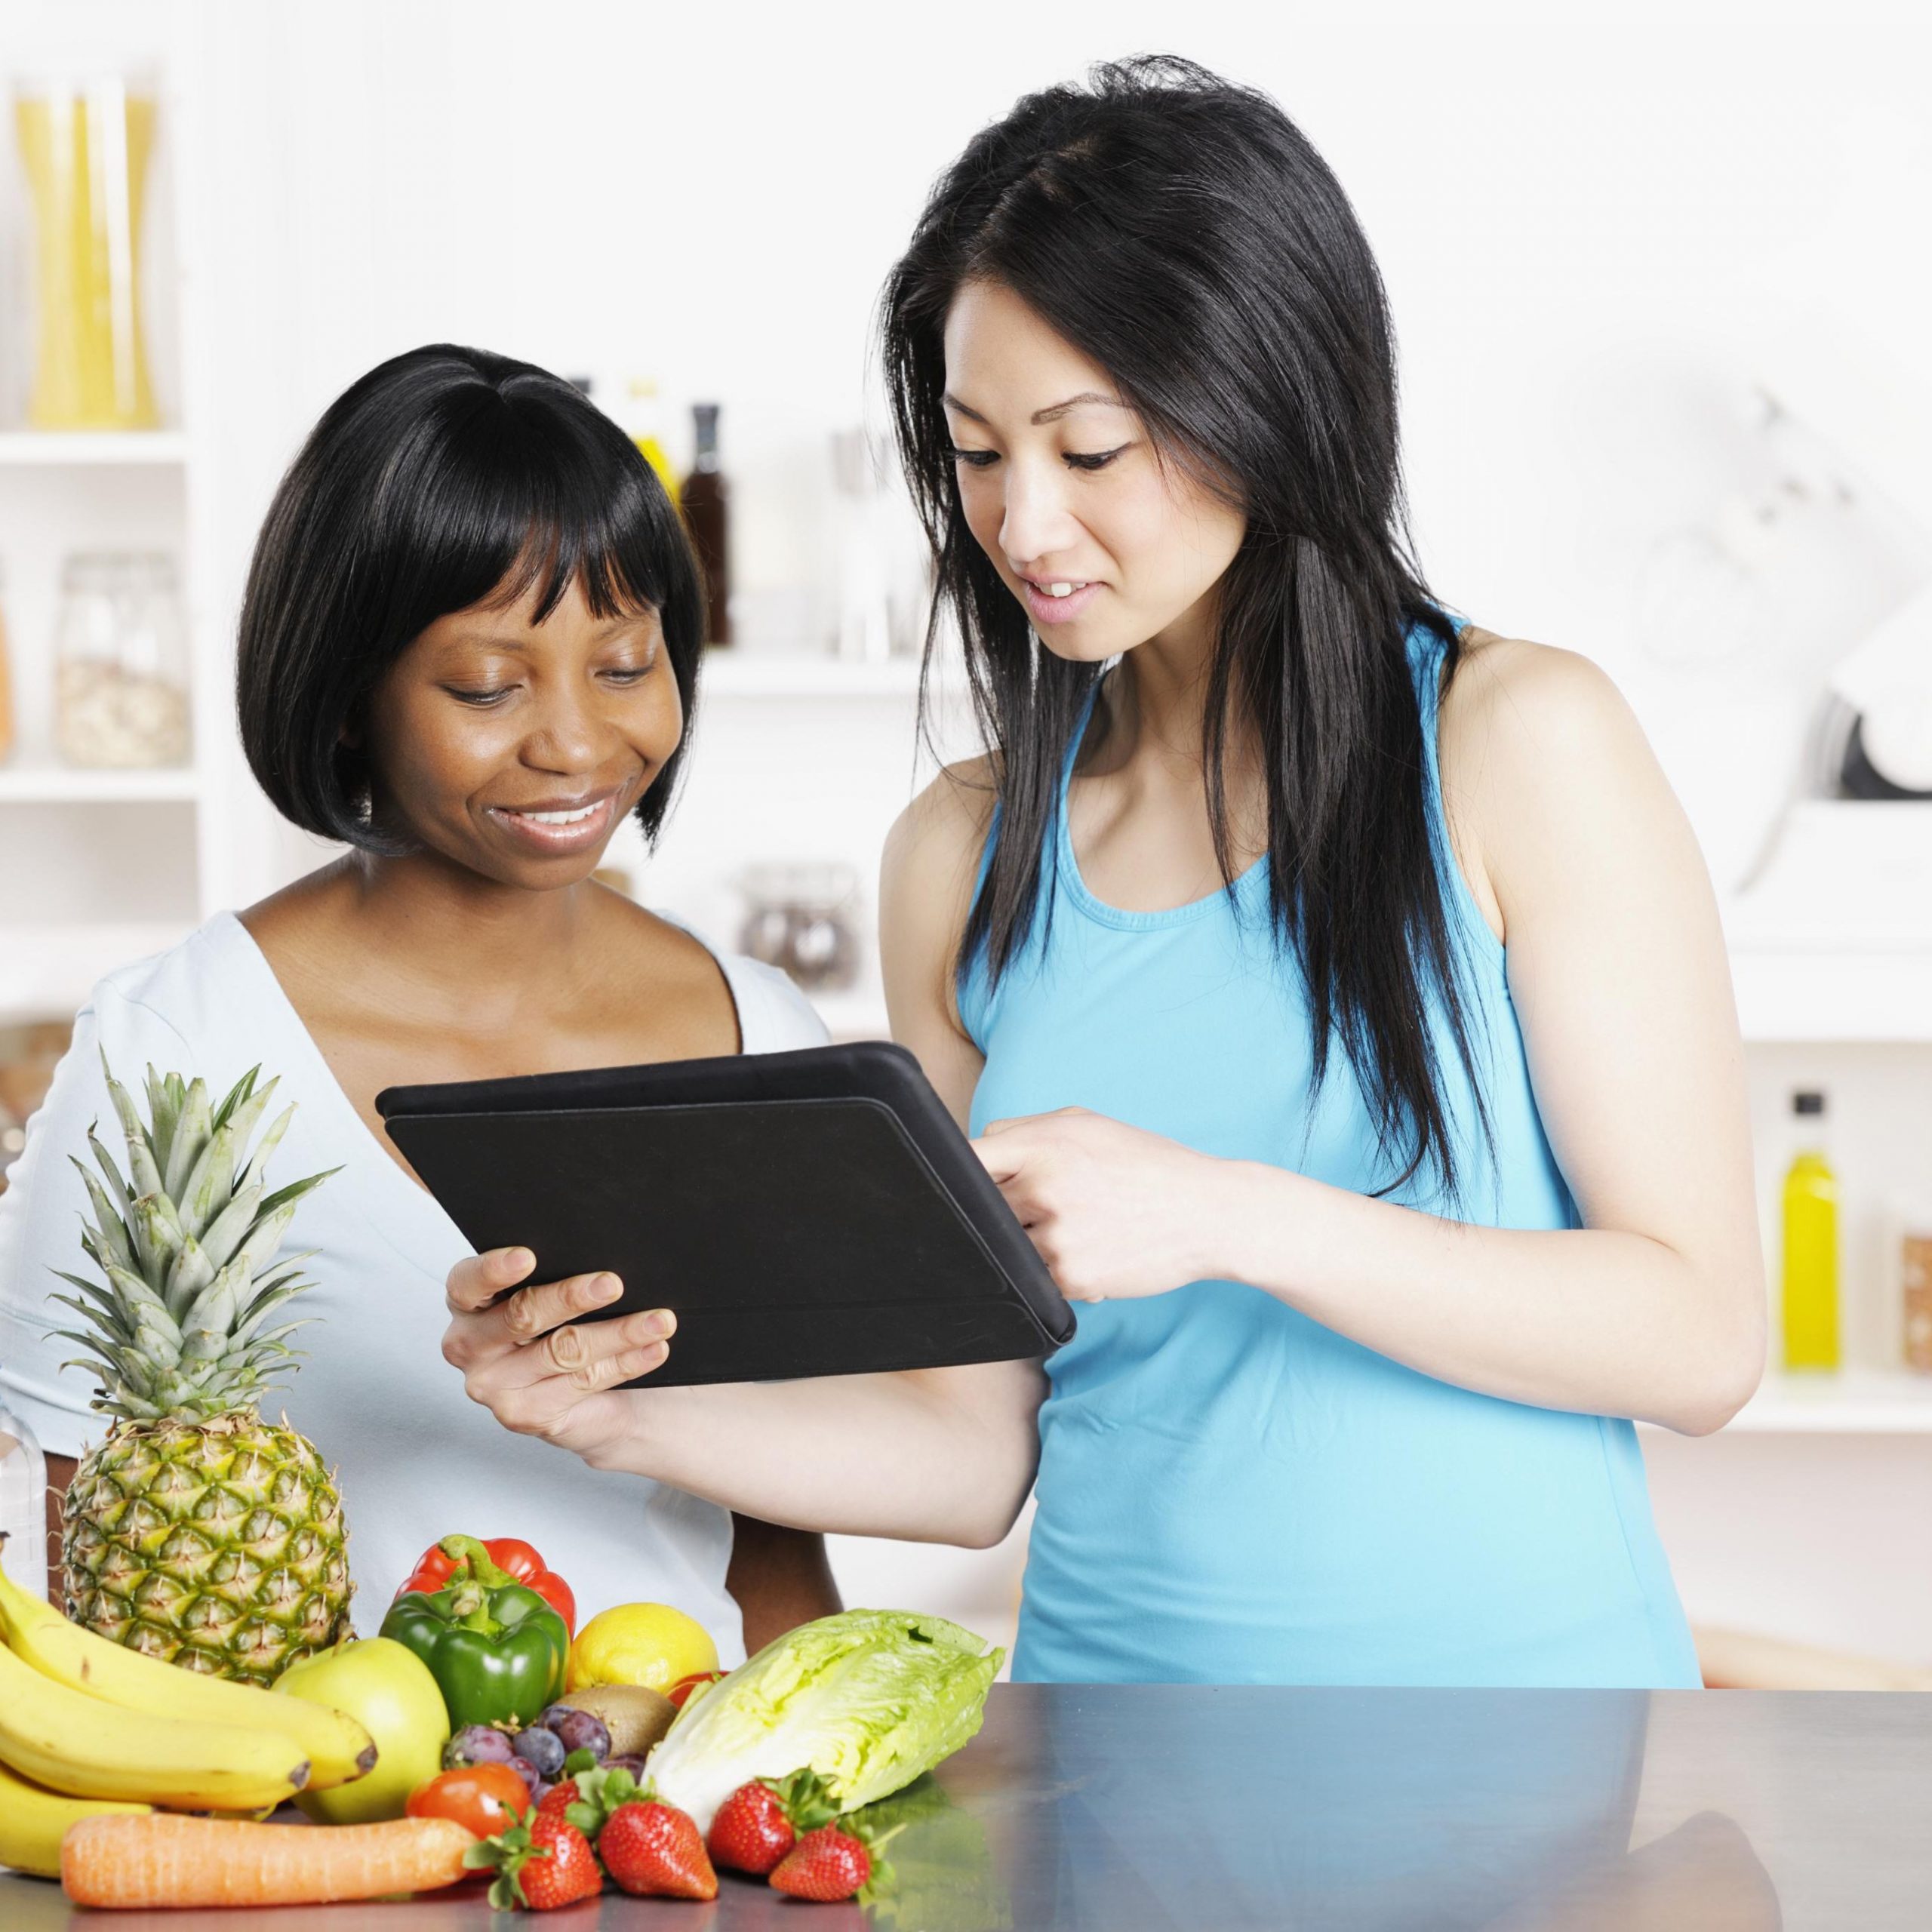 HOW TO CHOOSE THE RIGHT NUTRITIONIST